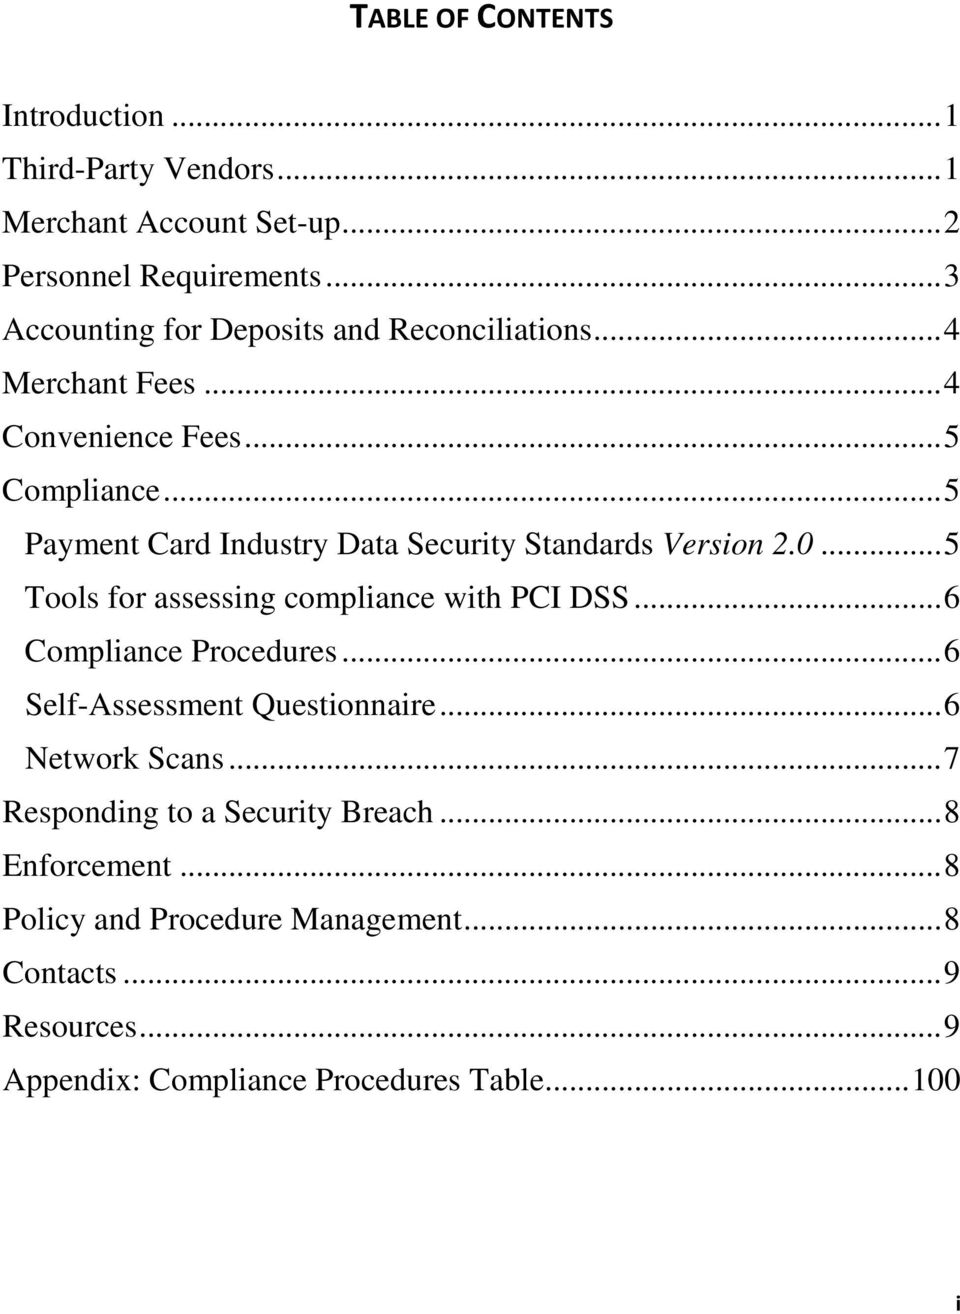 .. 5 Payment Card Industry Data Security Standards Version 2.0... 5 Tools for assessing compliance with PCI DSS... 6 Compliance Procedures.